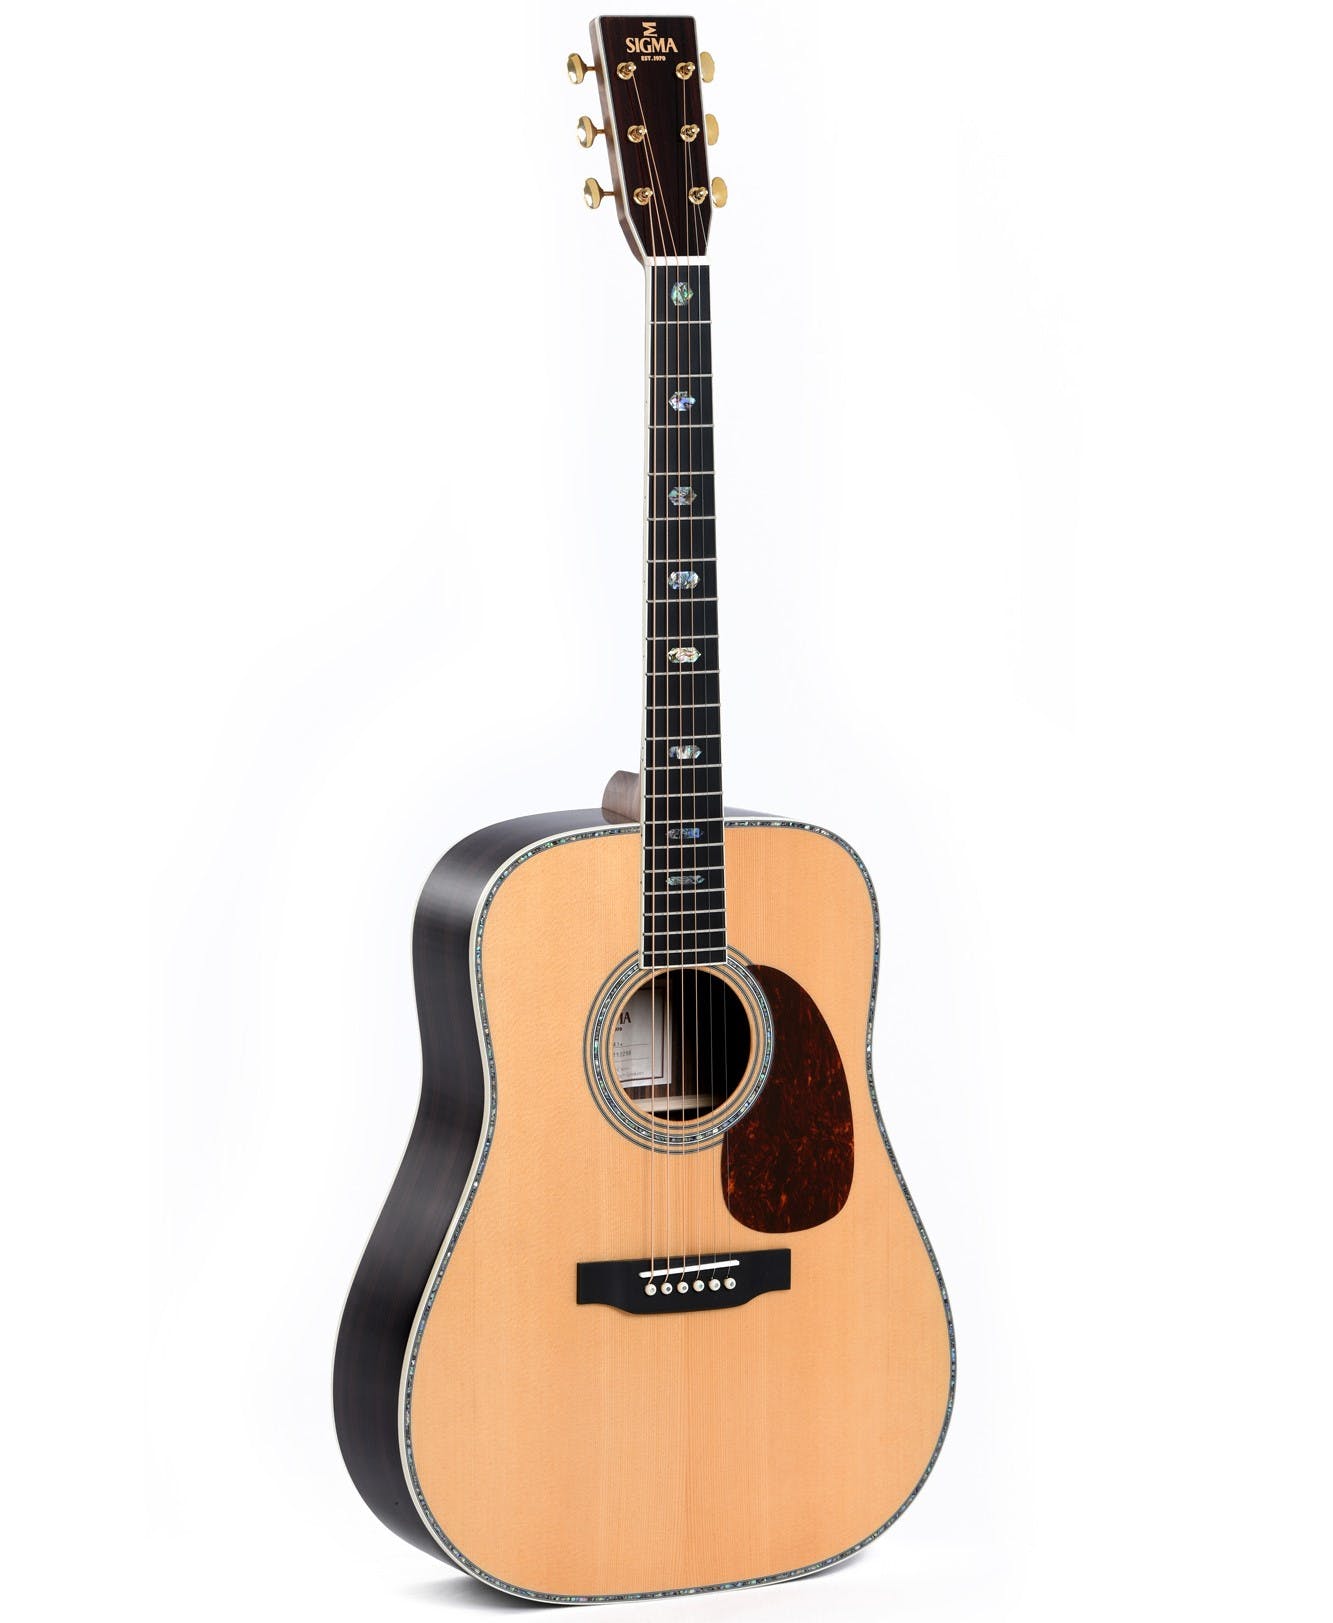 An image of Sigma DT-41 Dreadnought Acoustic Guitar | PMT Online